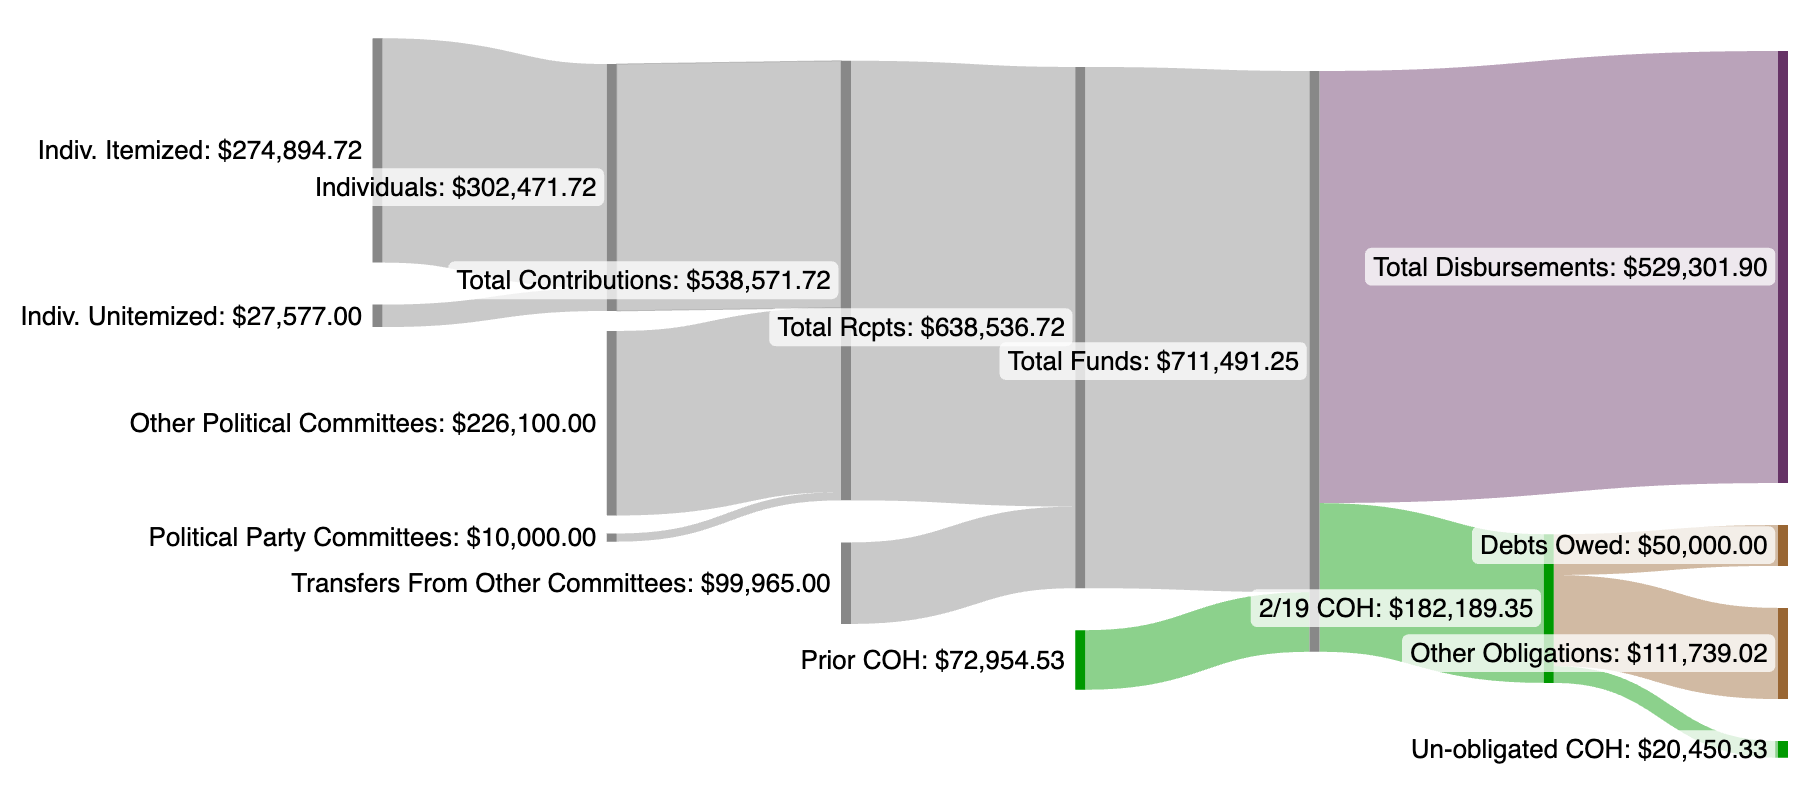 An even-more-detailed Sankey diagram showing additional flows at both ends, representing: Itemized contributions from Individuals versus Unitemized, and how much of the Cash On Hand at the end is targeted toward Debts and other Obligations (or is unobligated)